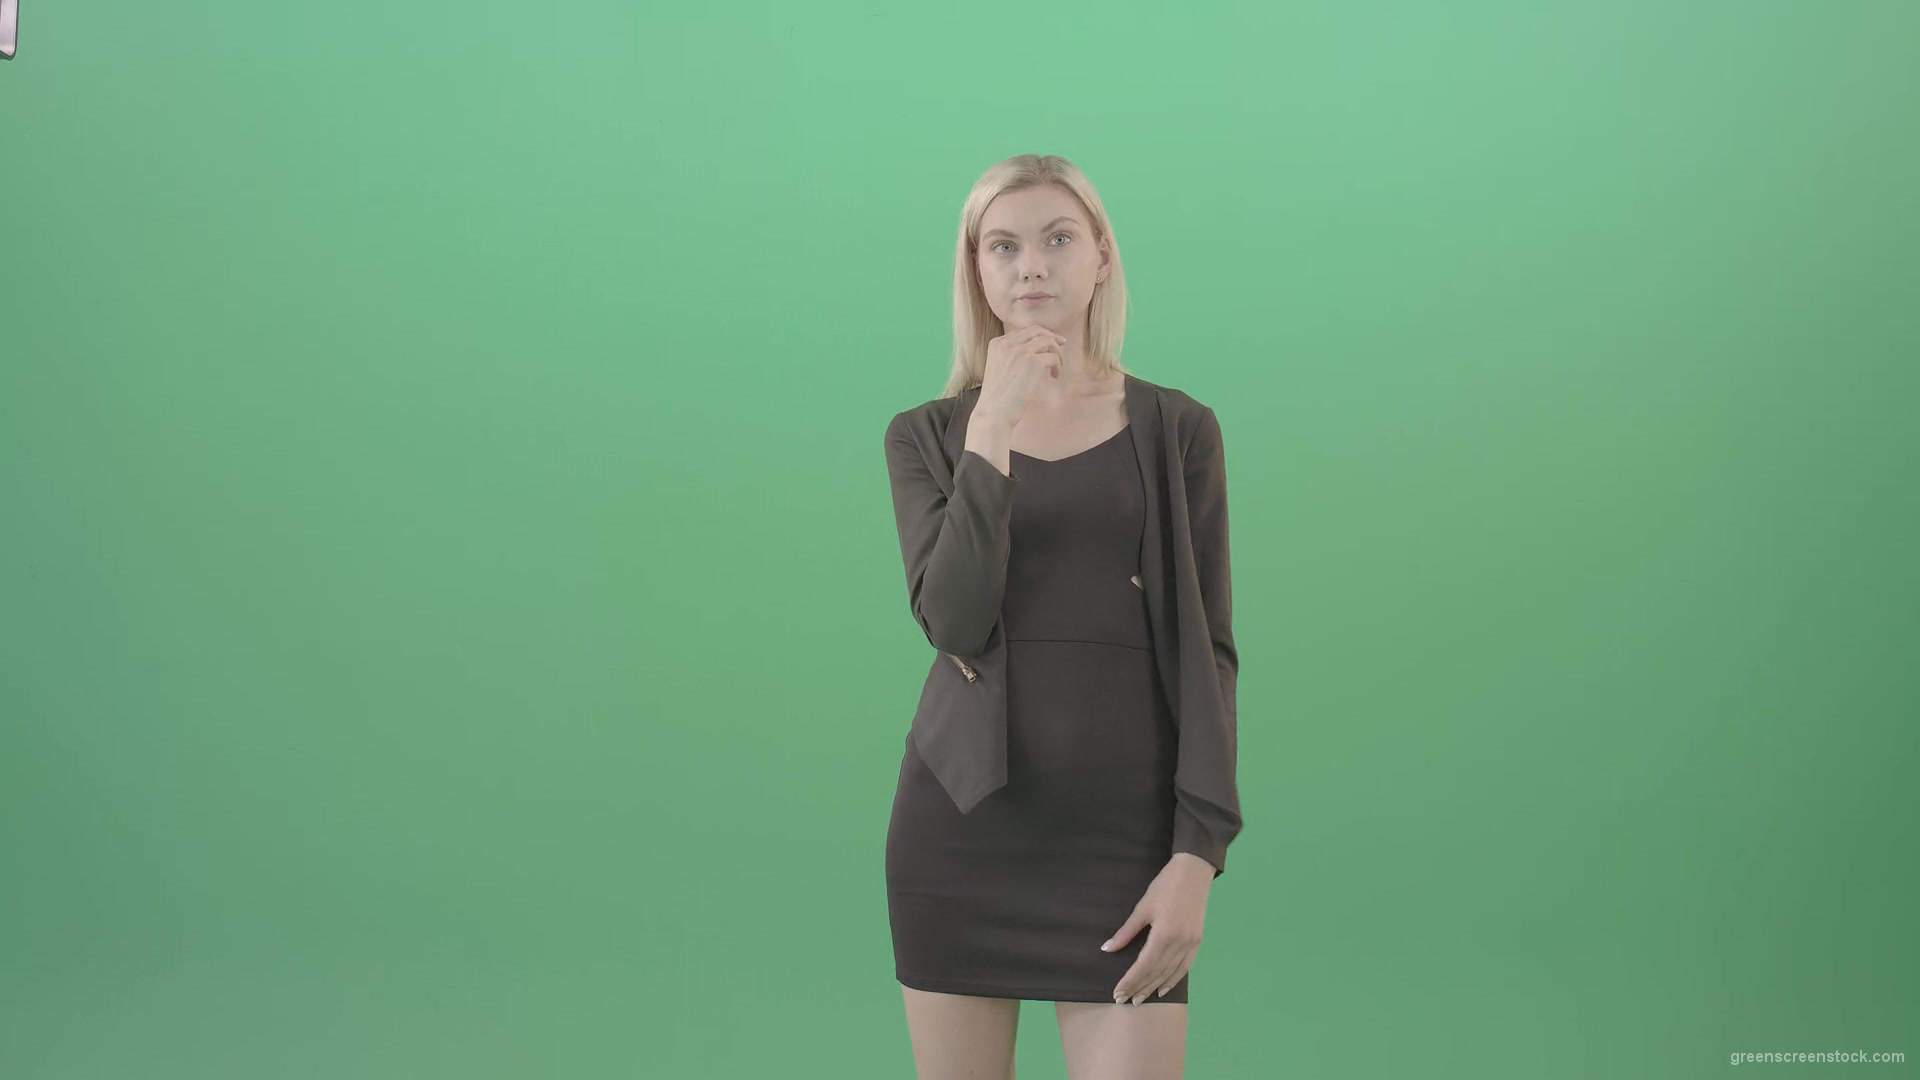 Girl-searching-in-internet-virtual-shopping-on-touch-screen-on-green-background-4K-Video-Footage-1920_005 Green Screen Stock